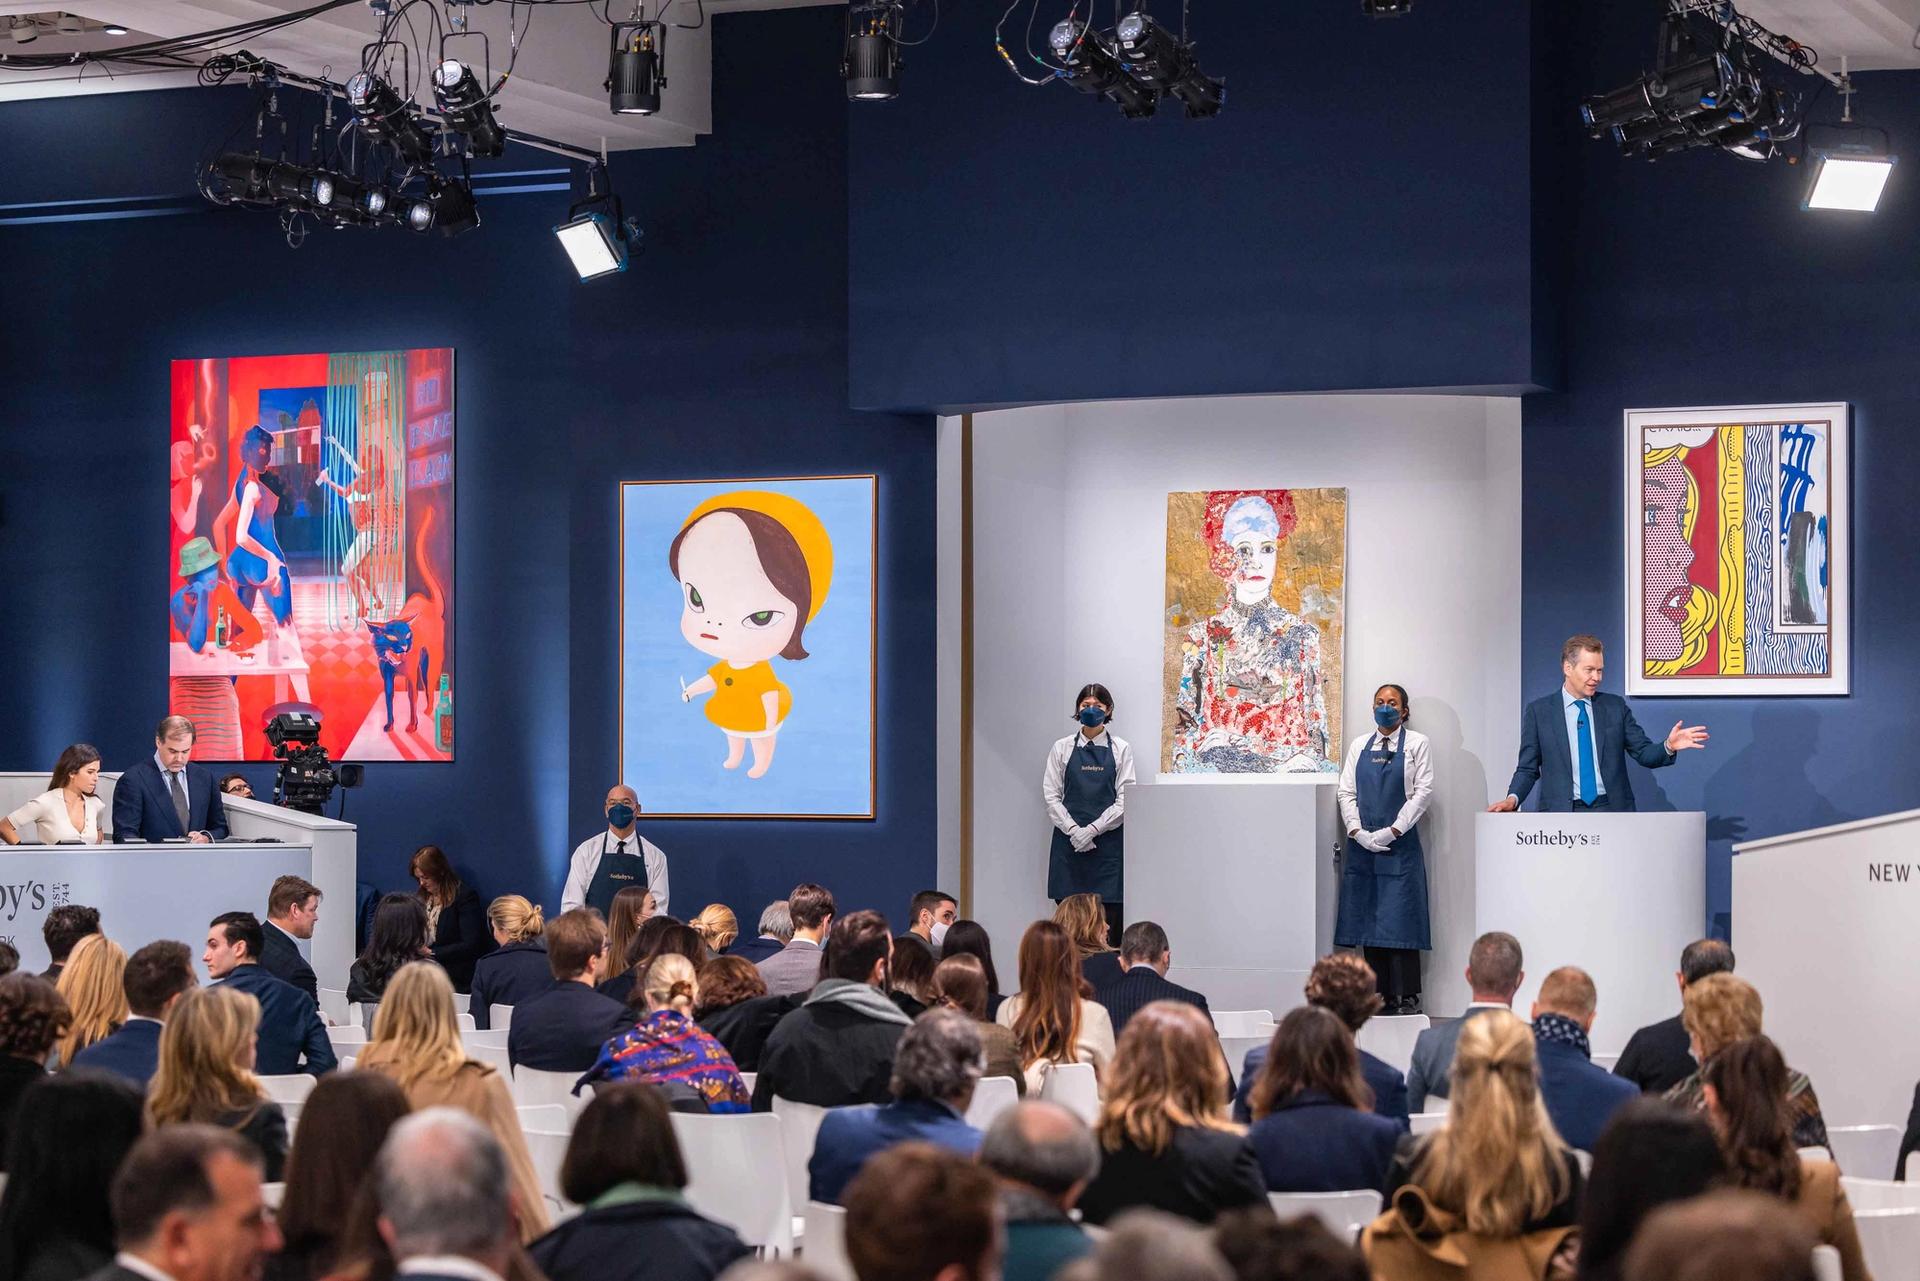 Maria Berrio's Flor sells for a record at Sotheby's last night

Courtesy of Sotheby's